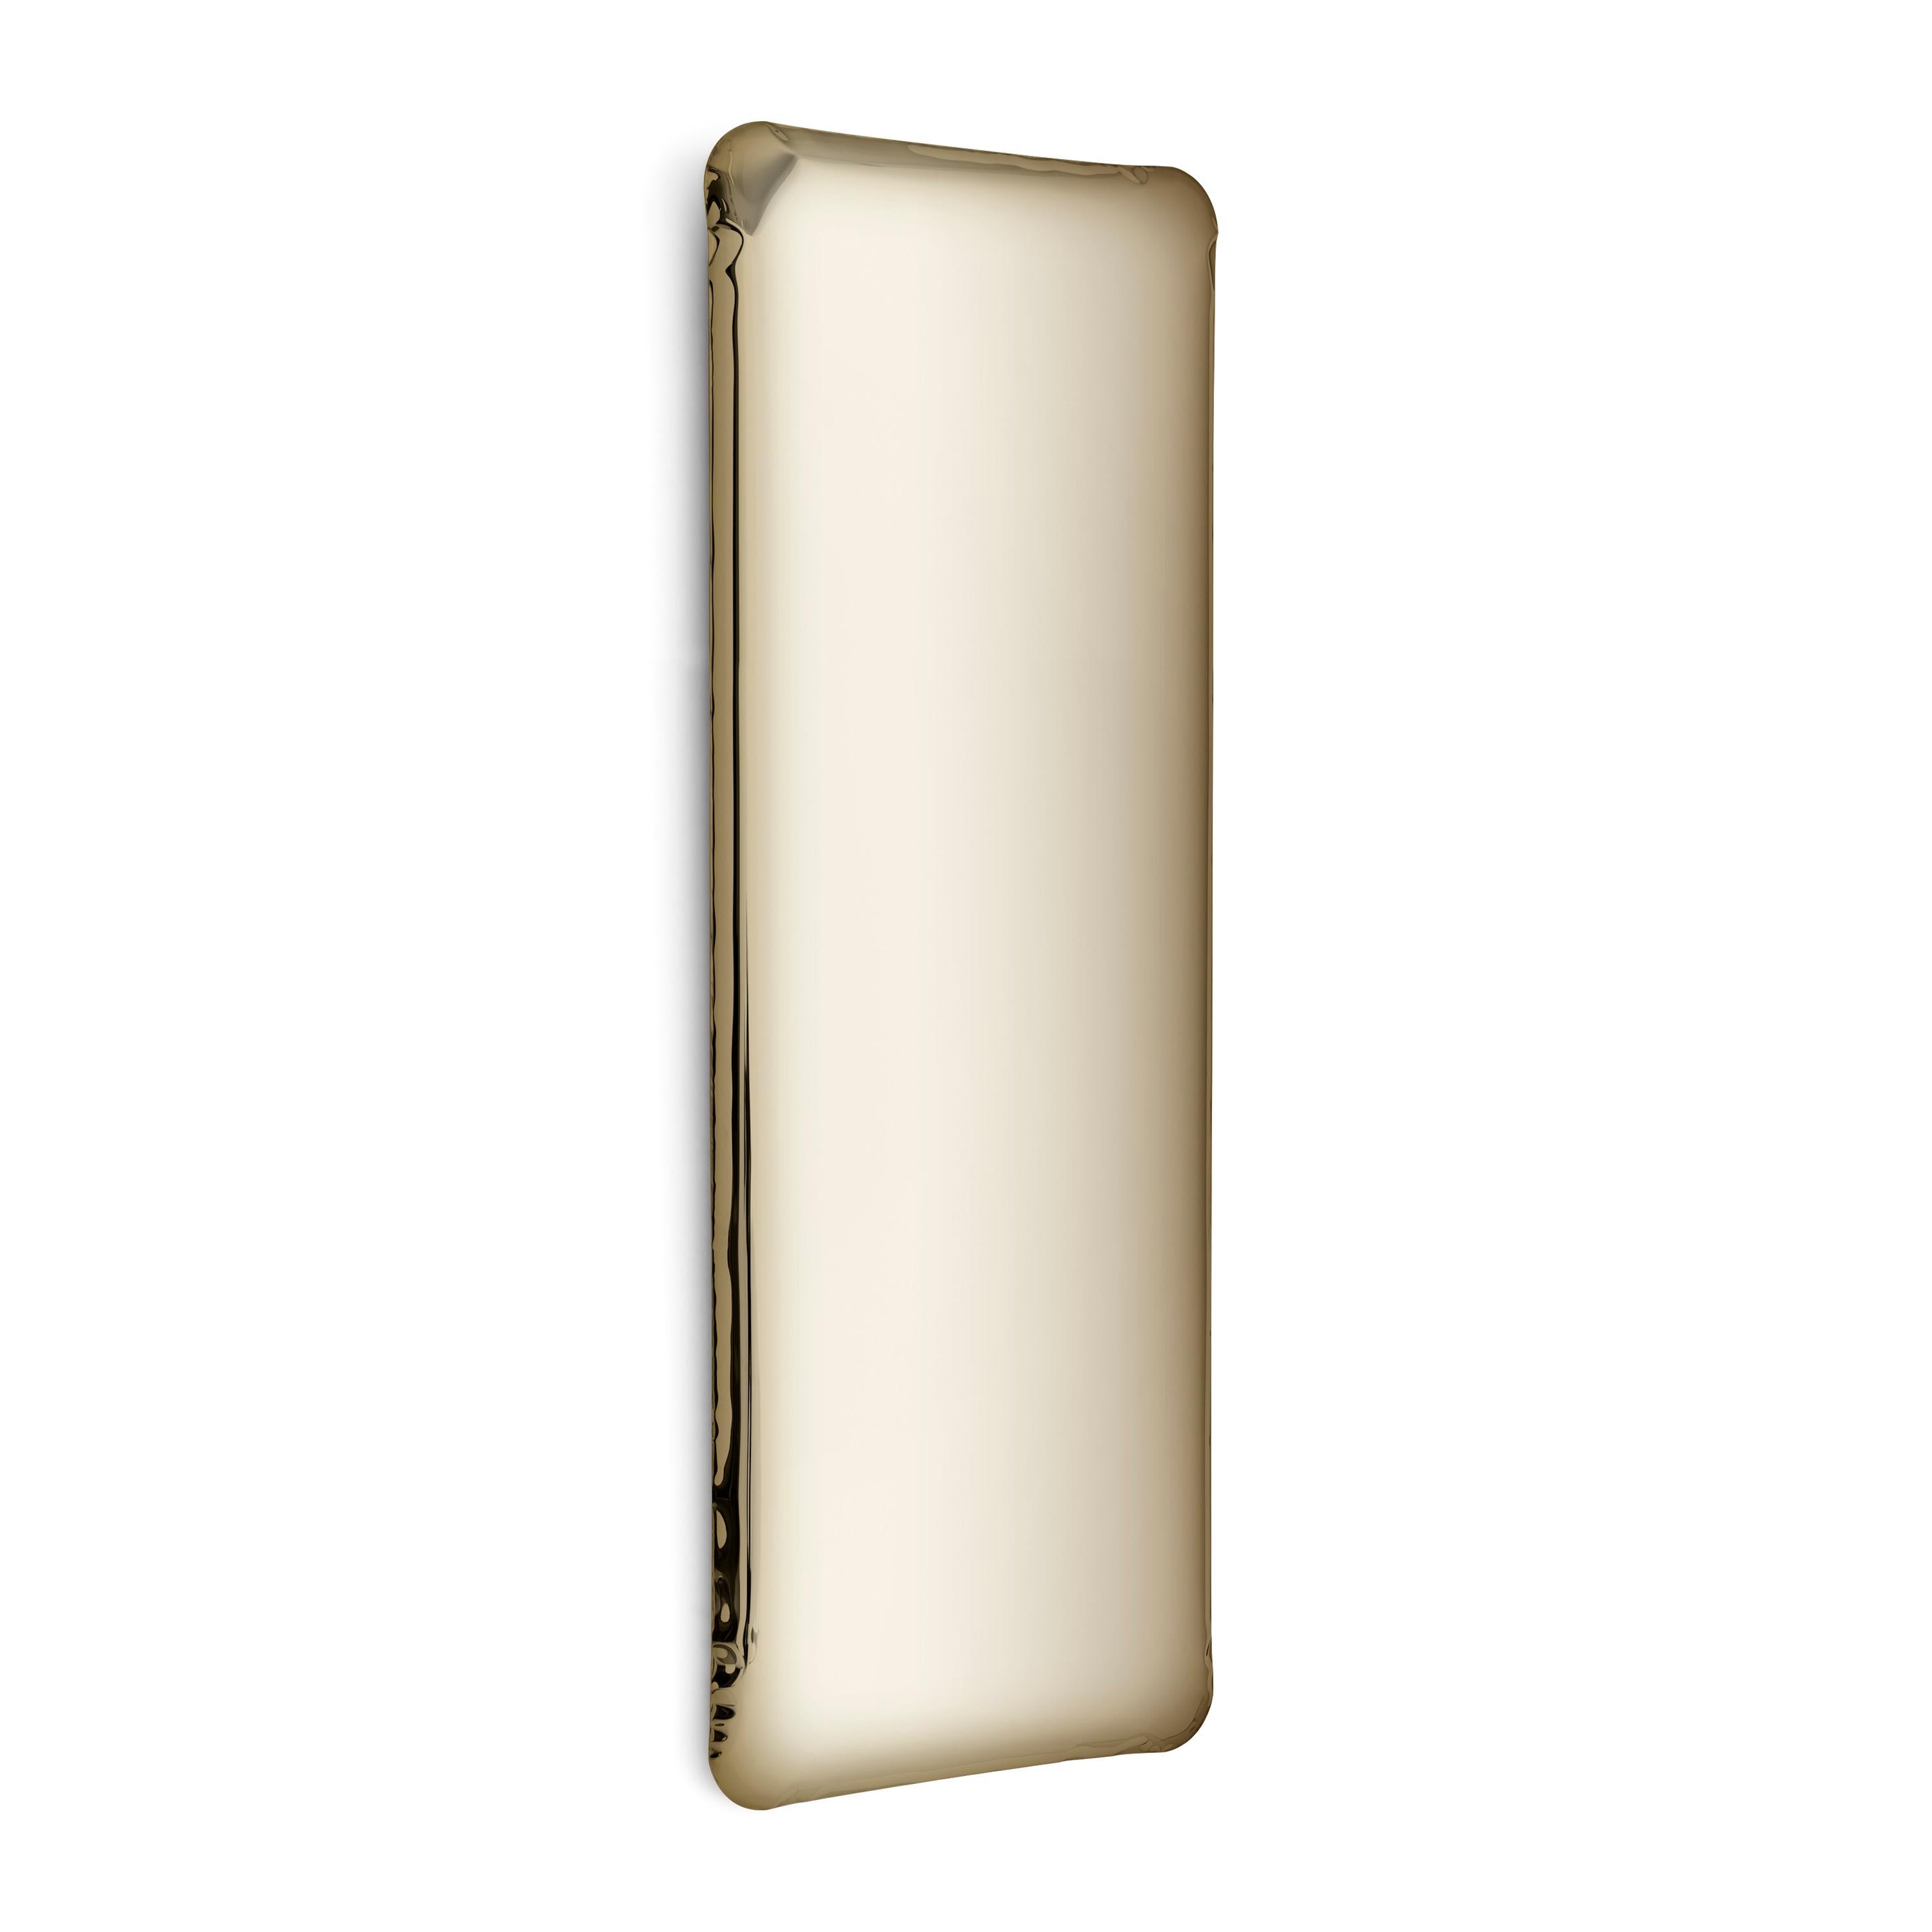 Light Gold Tafla Q1 sculptural wall mirror by Zieta
Dimensions: D 6 x W 60 x H 180 cm 
Material: Stainless steel. 
Finish: Light gold. 
Available in finishes: Stainless Steel, Deep Space Blue, Emerald, Sapphire, Sapphire/Emerald, Dark Matter, Red